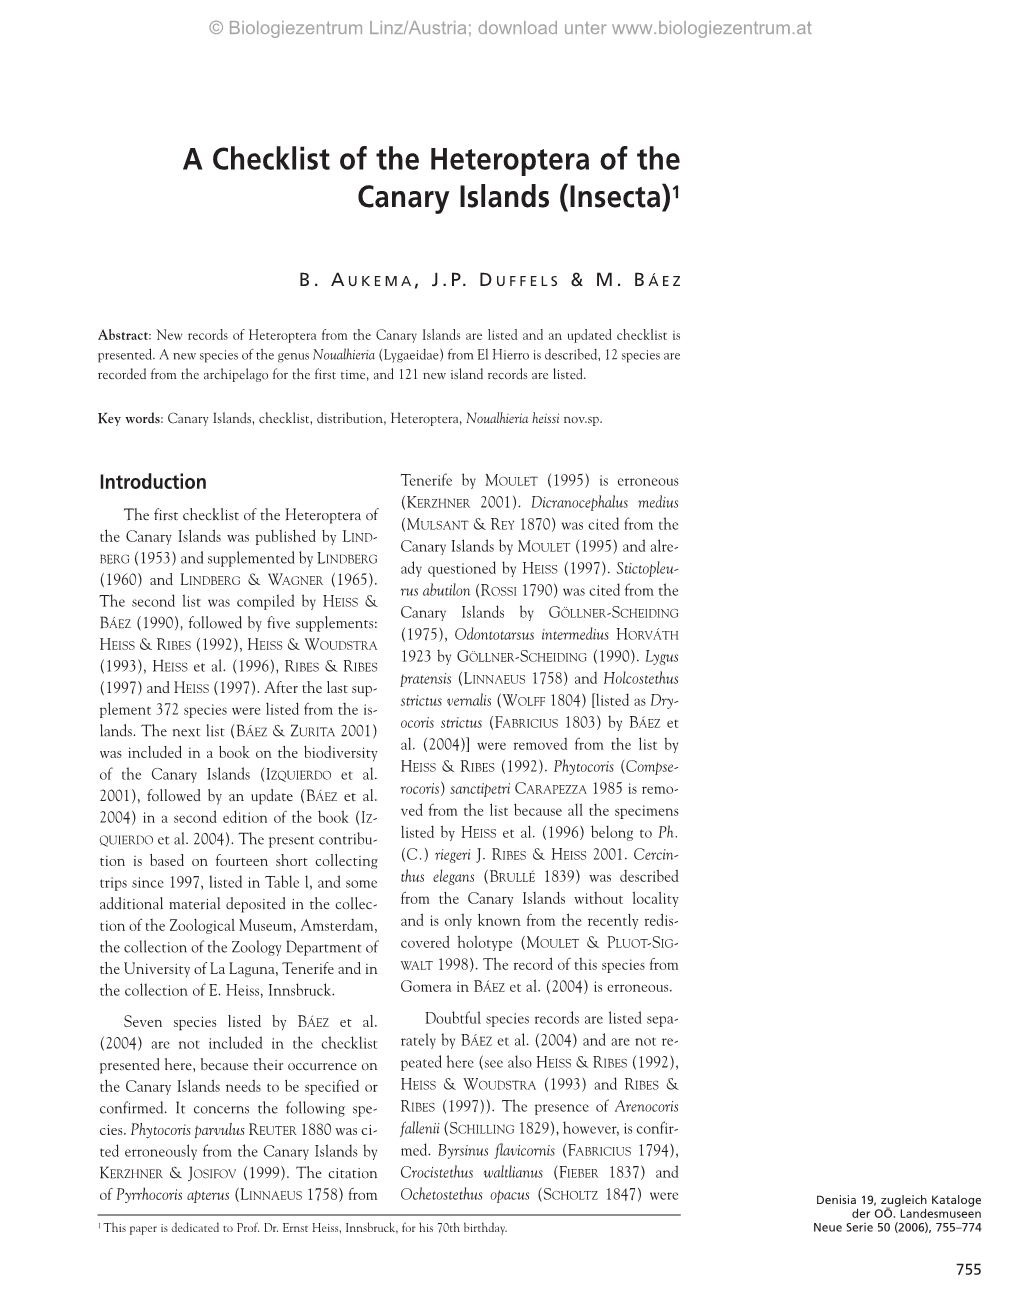 A Checklist of the Heteroptera of the Canary Islands (Insecta)1